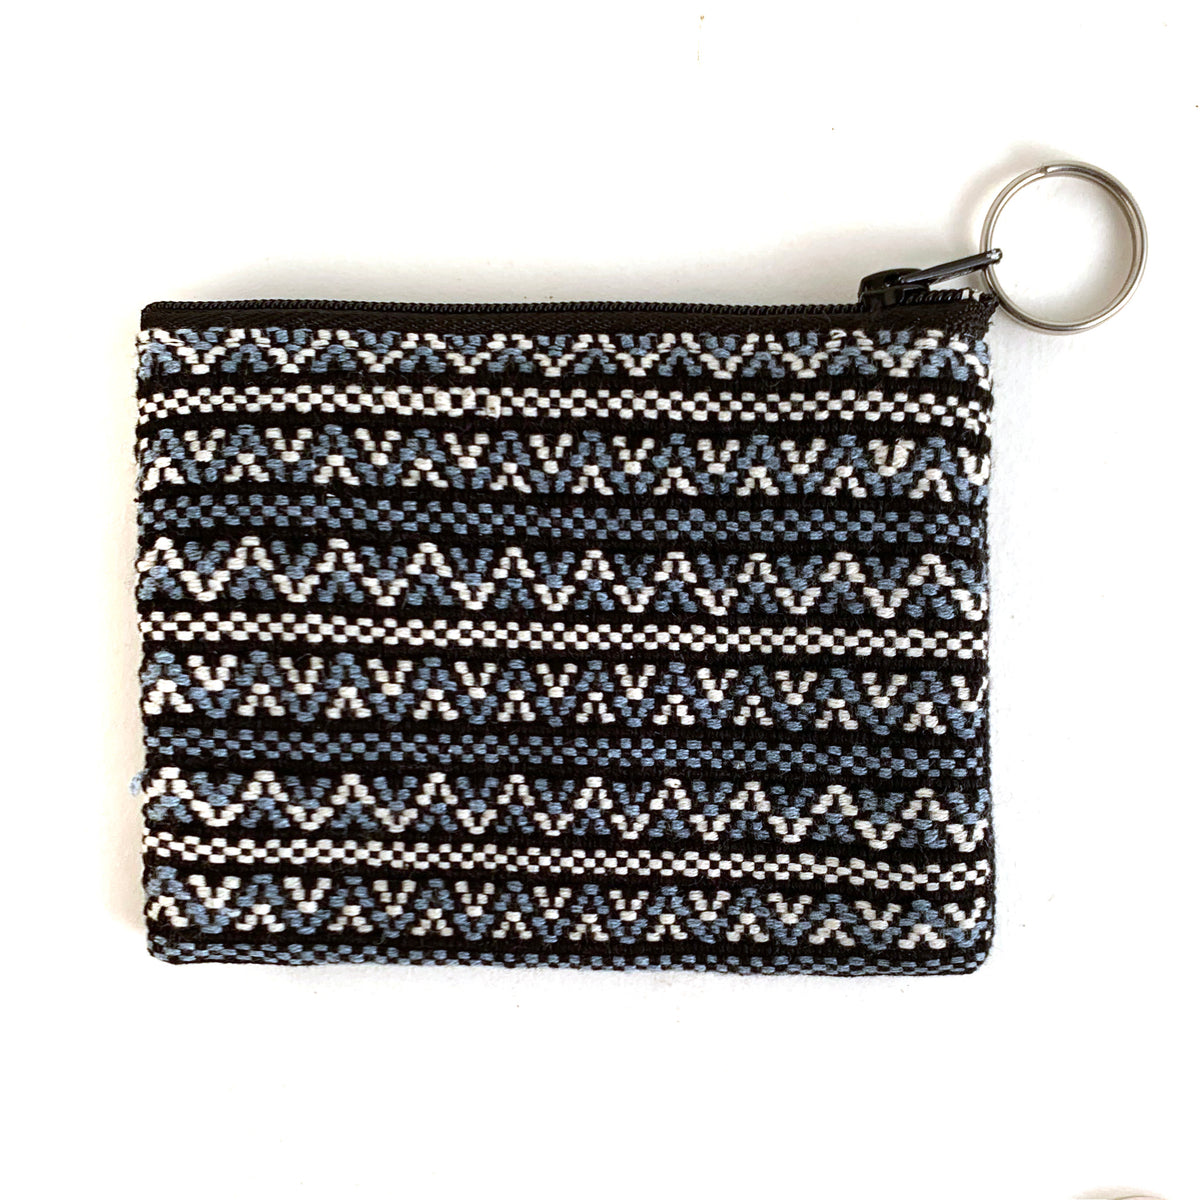 Keychain Coin Purse | Leather Accessories | Urban Southern